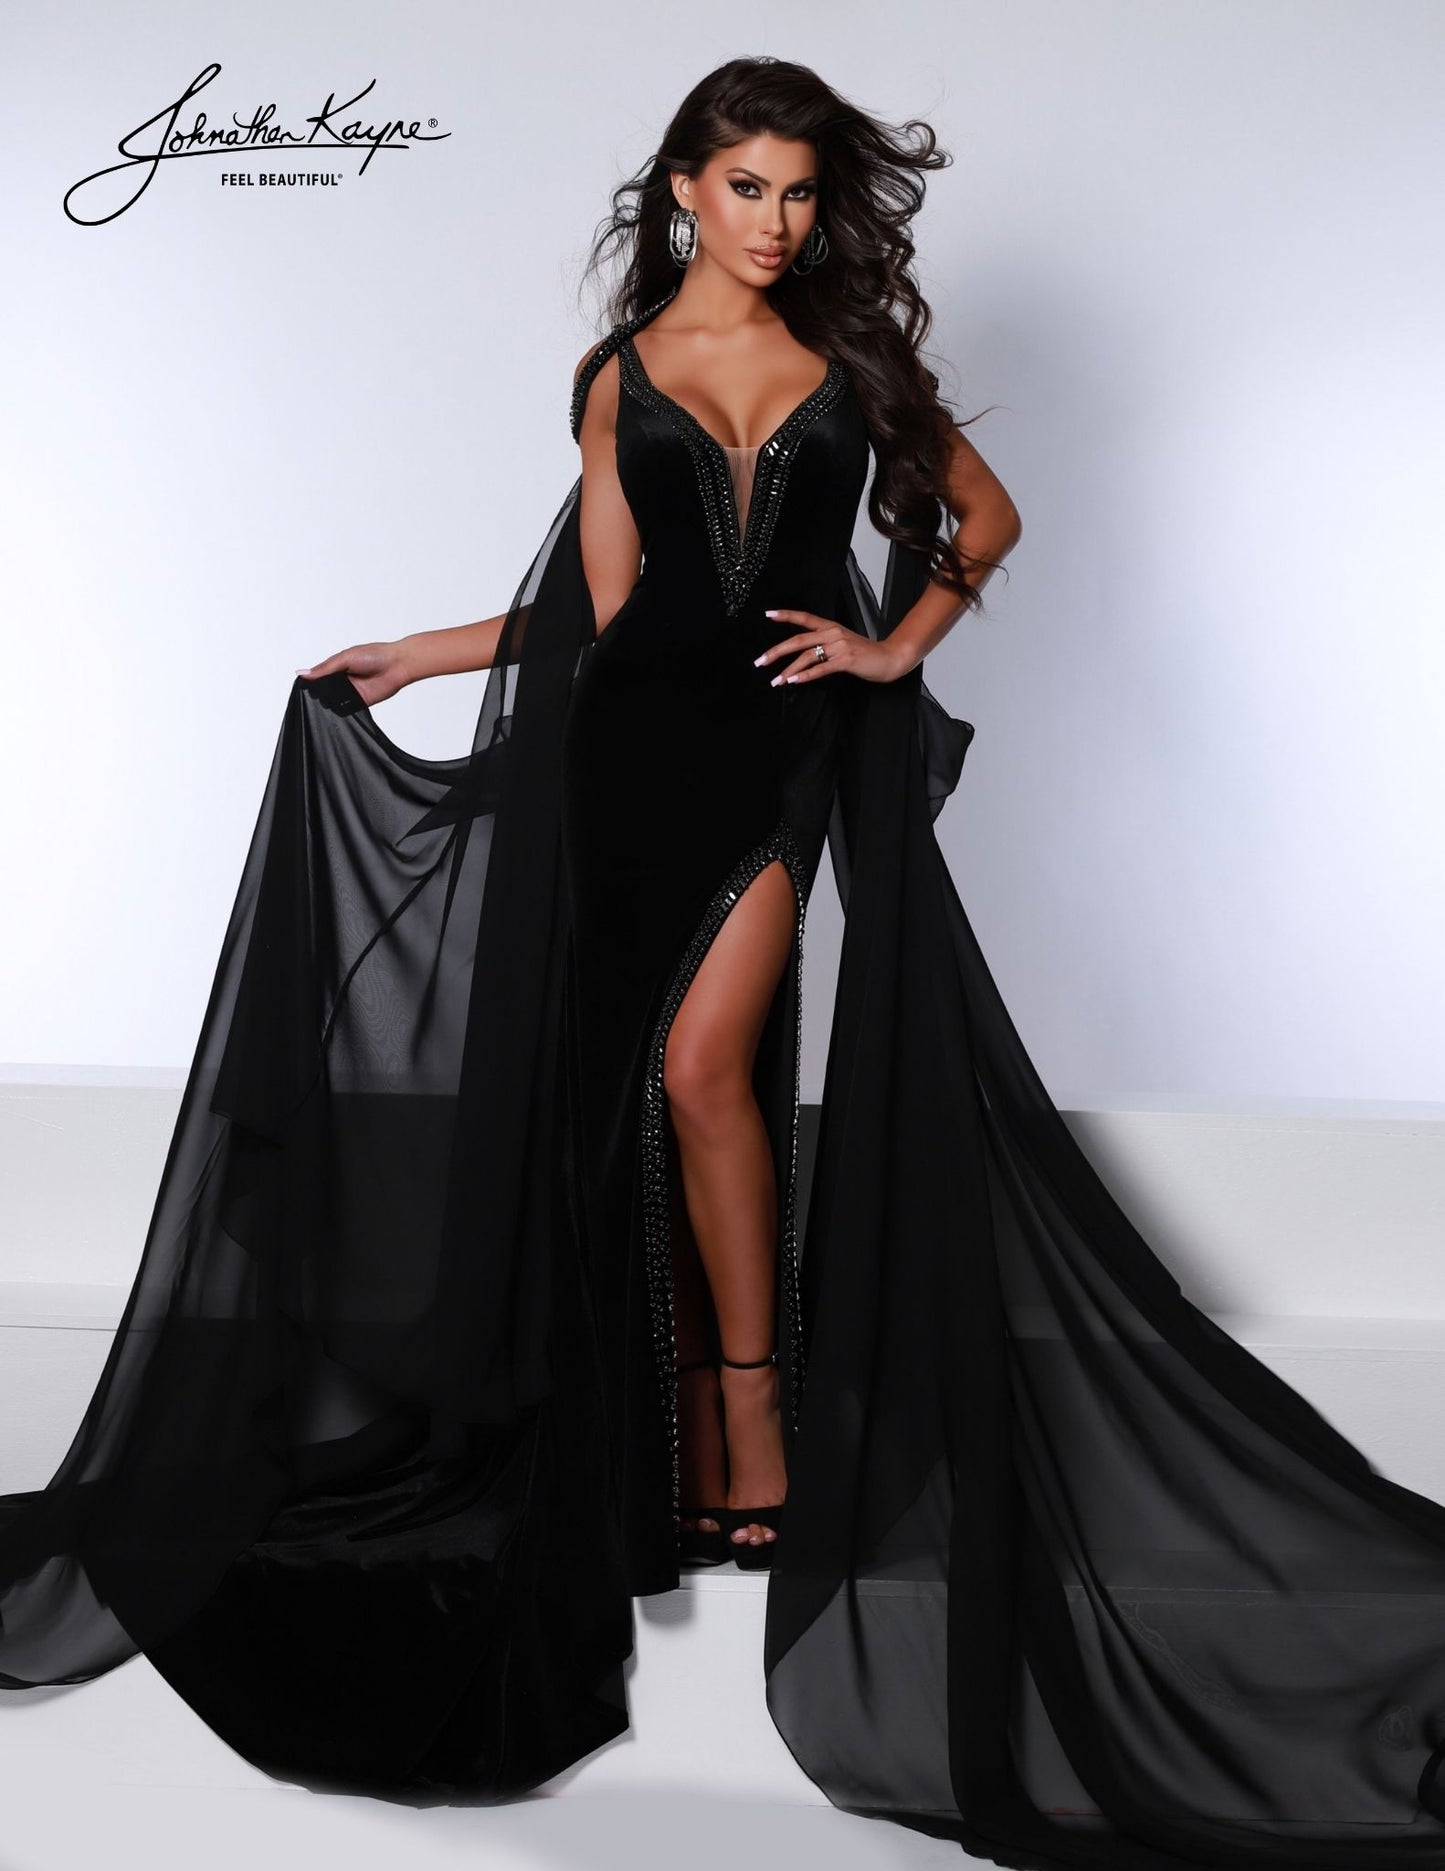 Look stunning in the Johnathan Kayne 2731 dress. Crafted from plush velvet with stretch sequins and a chiffon mesh overlay, this glamorous gown features a flattering V-neckline, a slit in the skirt, and a sparkling sequined waistband. Make an unforgettable entrance at your next special event.     Sizes:00,0,2,4,6,8,10,12,14,16  Colors: Black, Ocean , Rose 